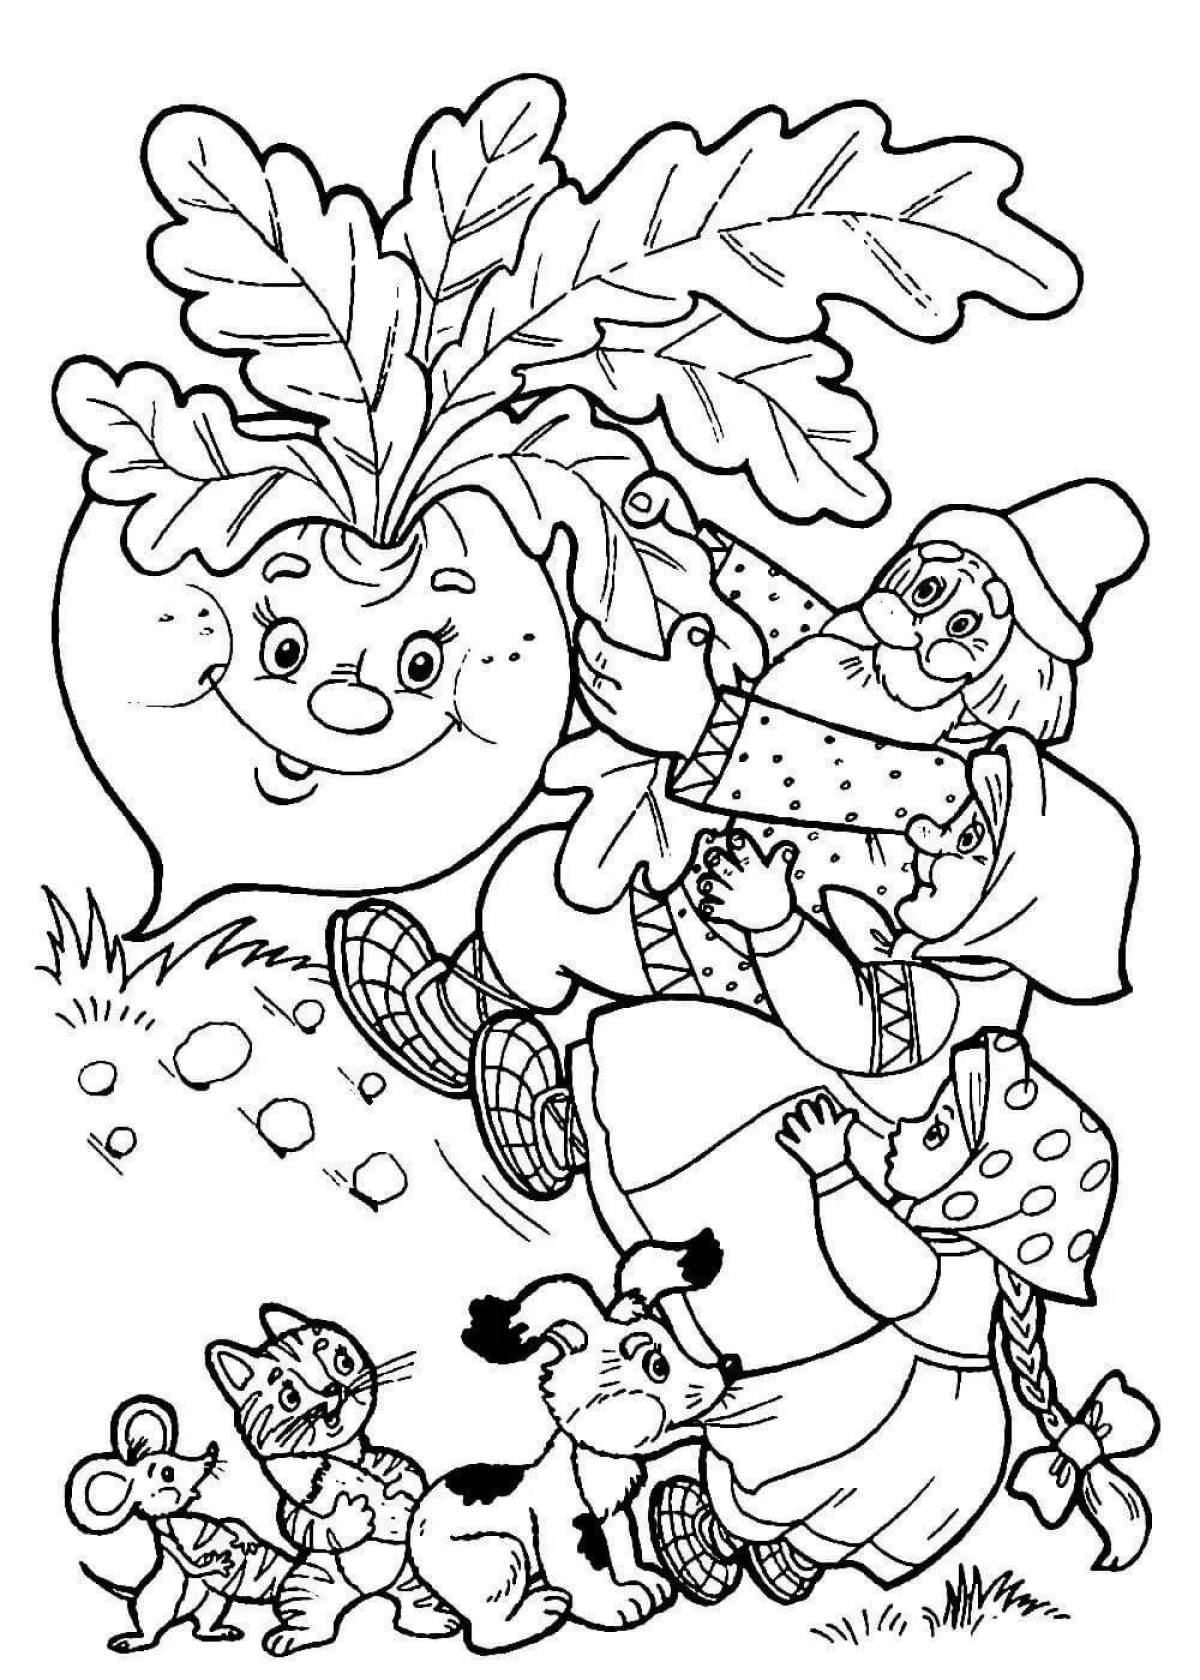 Dazzling coloring book heroes of Russian fairy tales